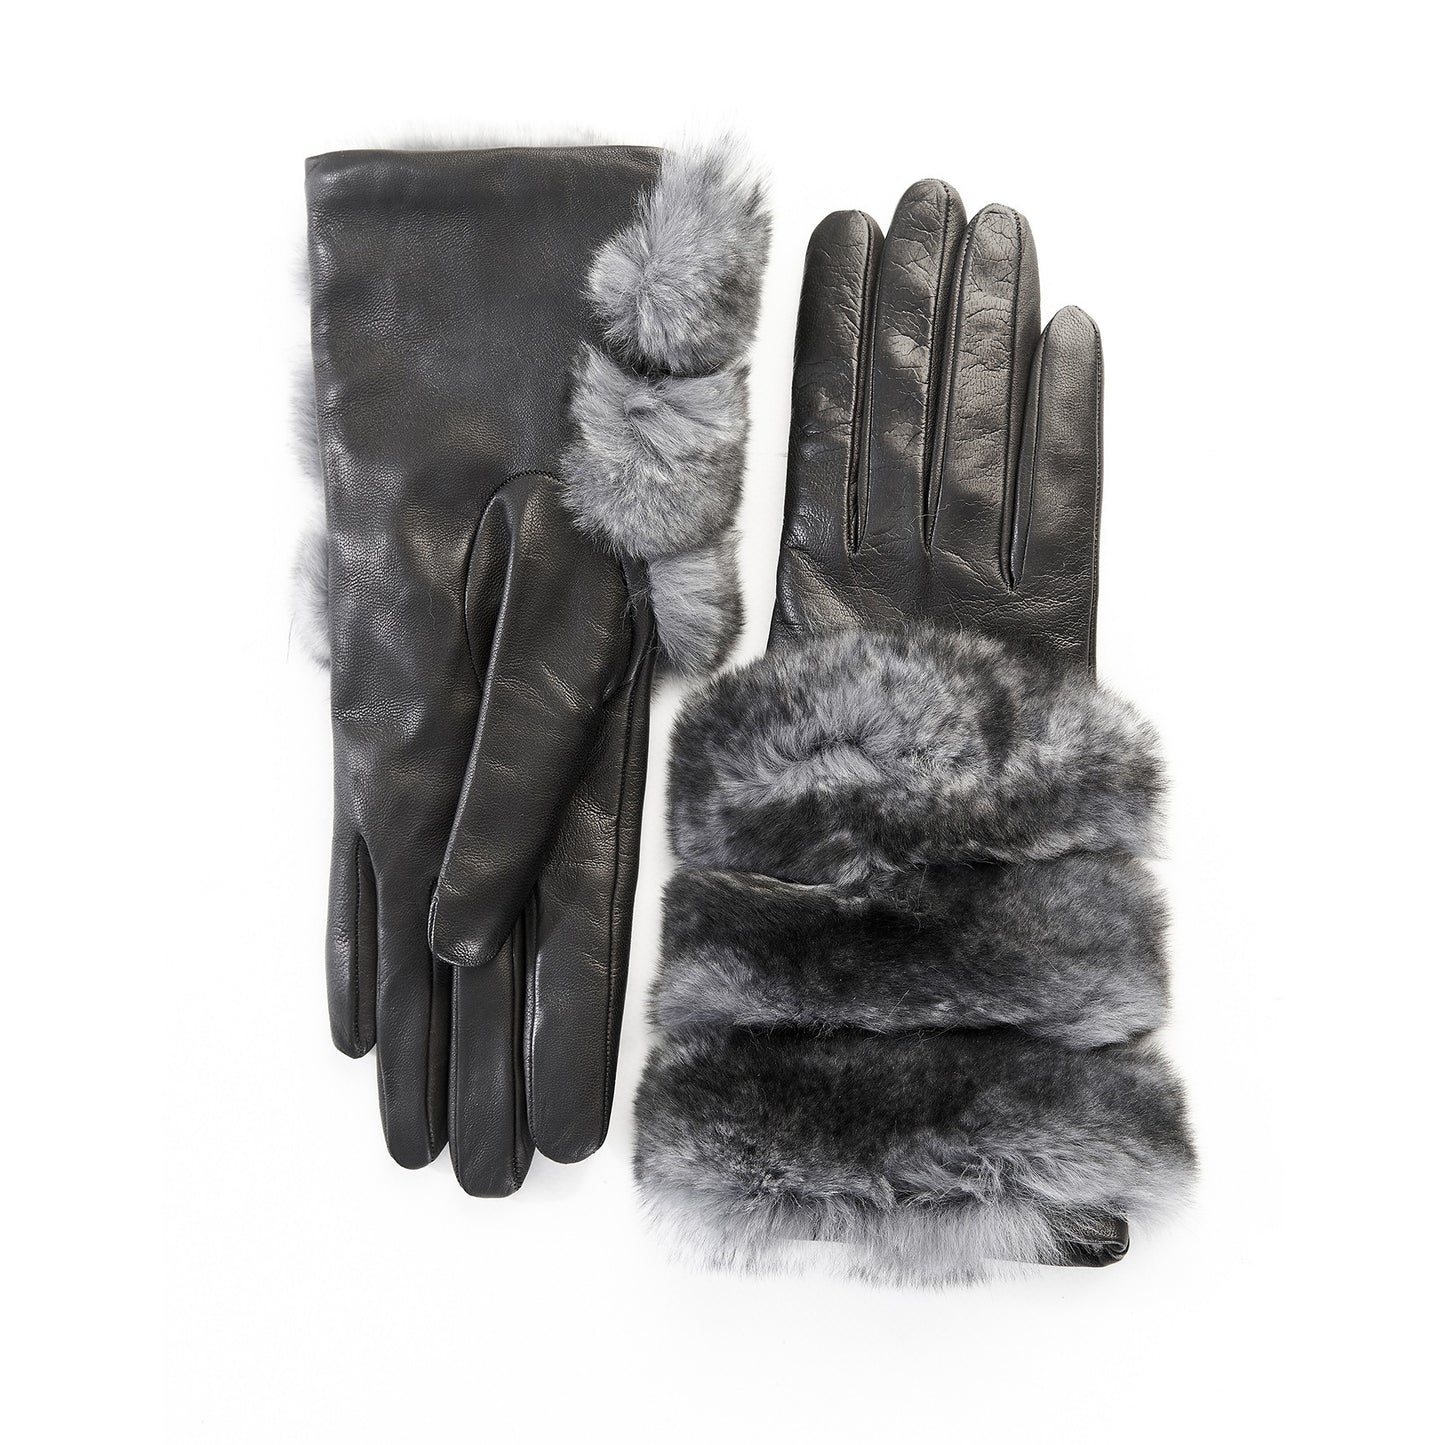 Women's gloves in black nappa leather with natural fur